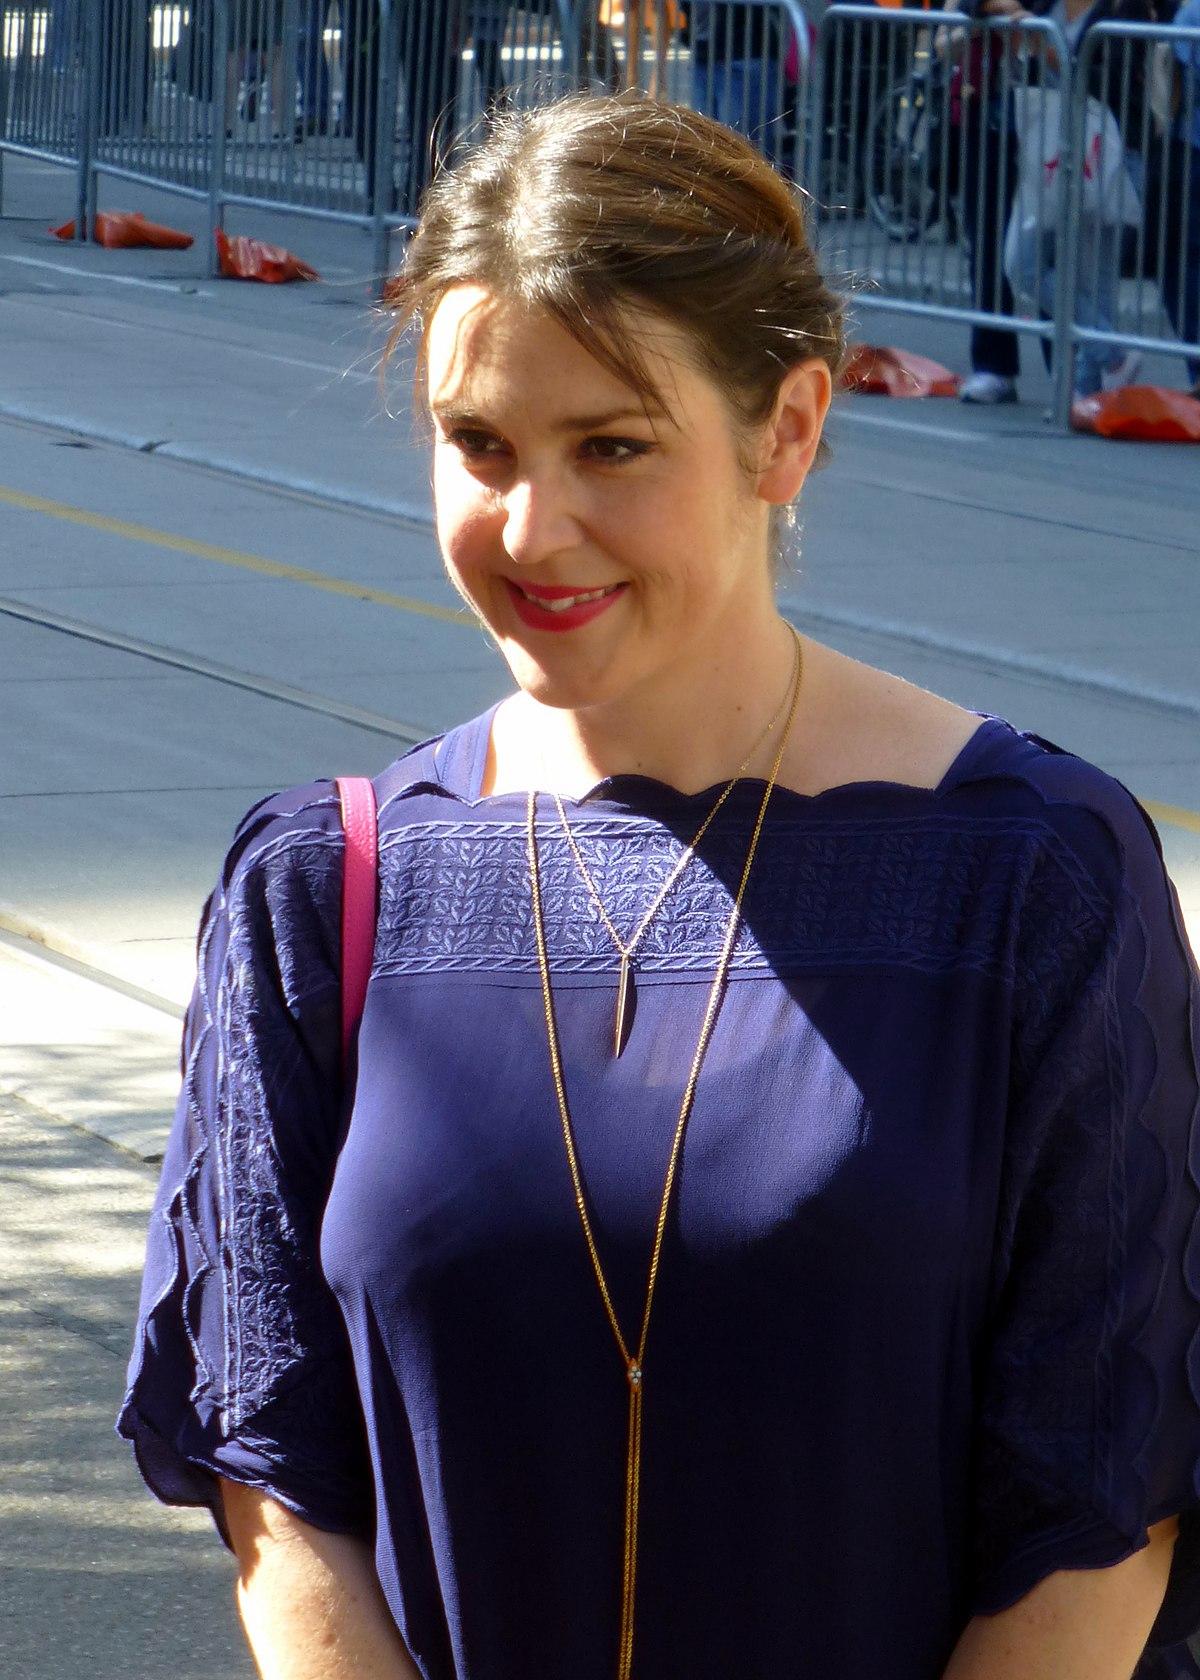 60+ Hot Pictures Of Melanie Lynskey Which Will Keep You Up At Nights 350